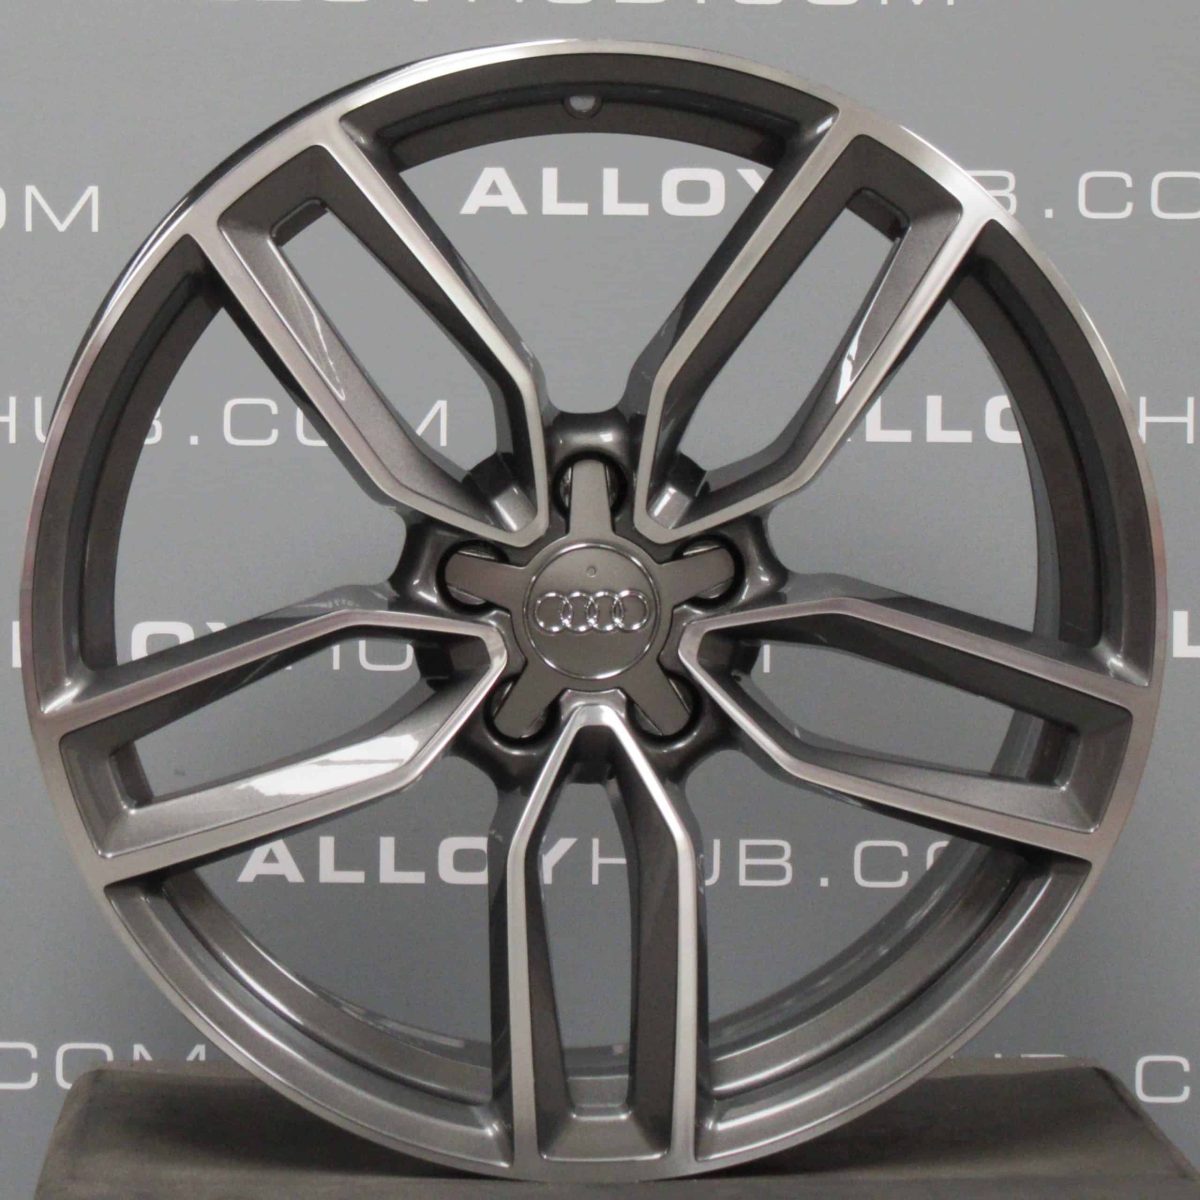 Genuine Audi RS3 S3 A3 8V 5 Twin Spoke 19" Inch Alloy Wheels with Grey & Diamond Turned Finish 8V0 601 025 AB